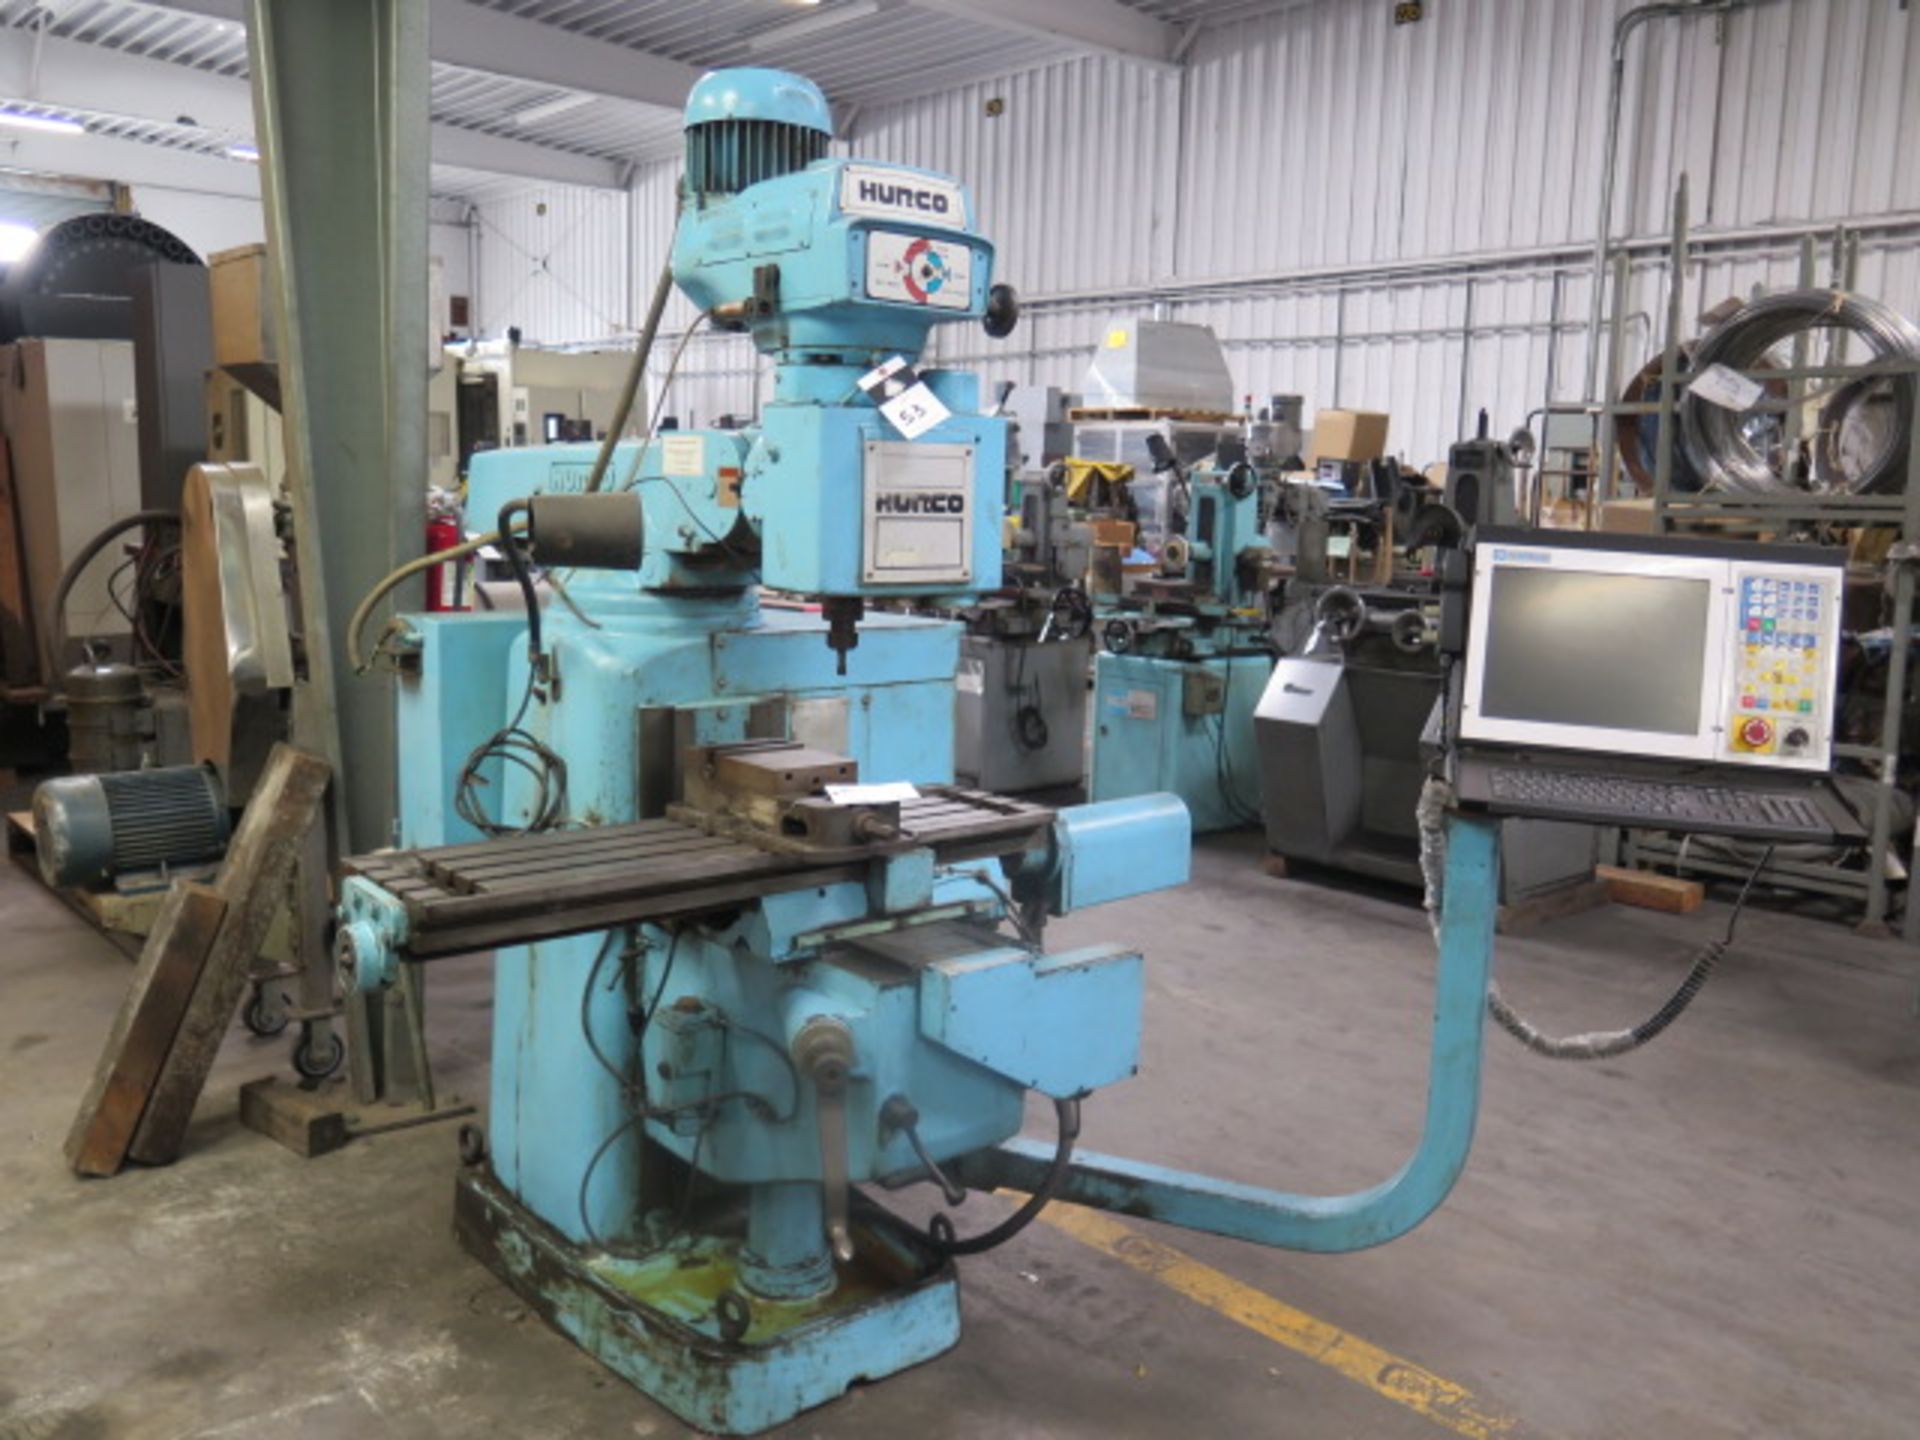 Hurco 3-Axis CNC Vertical Mill s/n SDX-8016074A w/ Centroid Controls, 60-4200 Dial RPM, SOLD AS IS